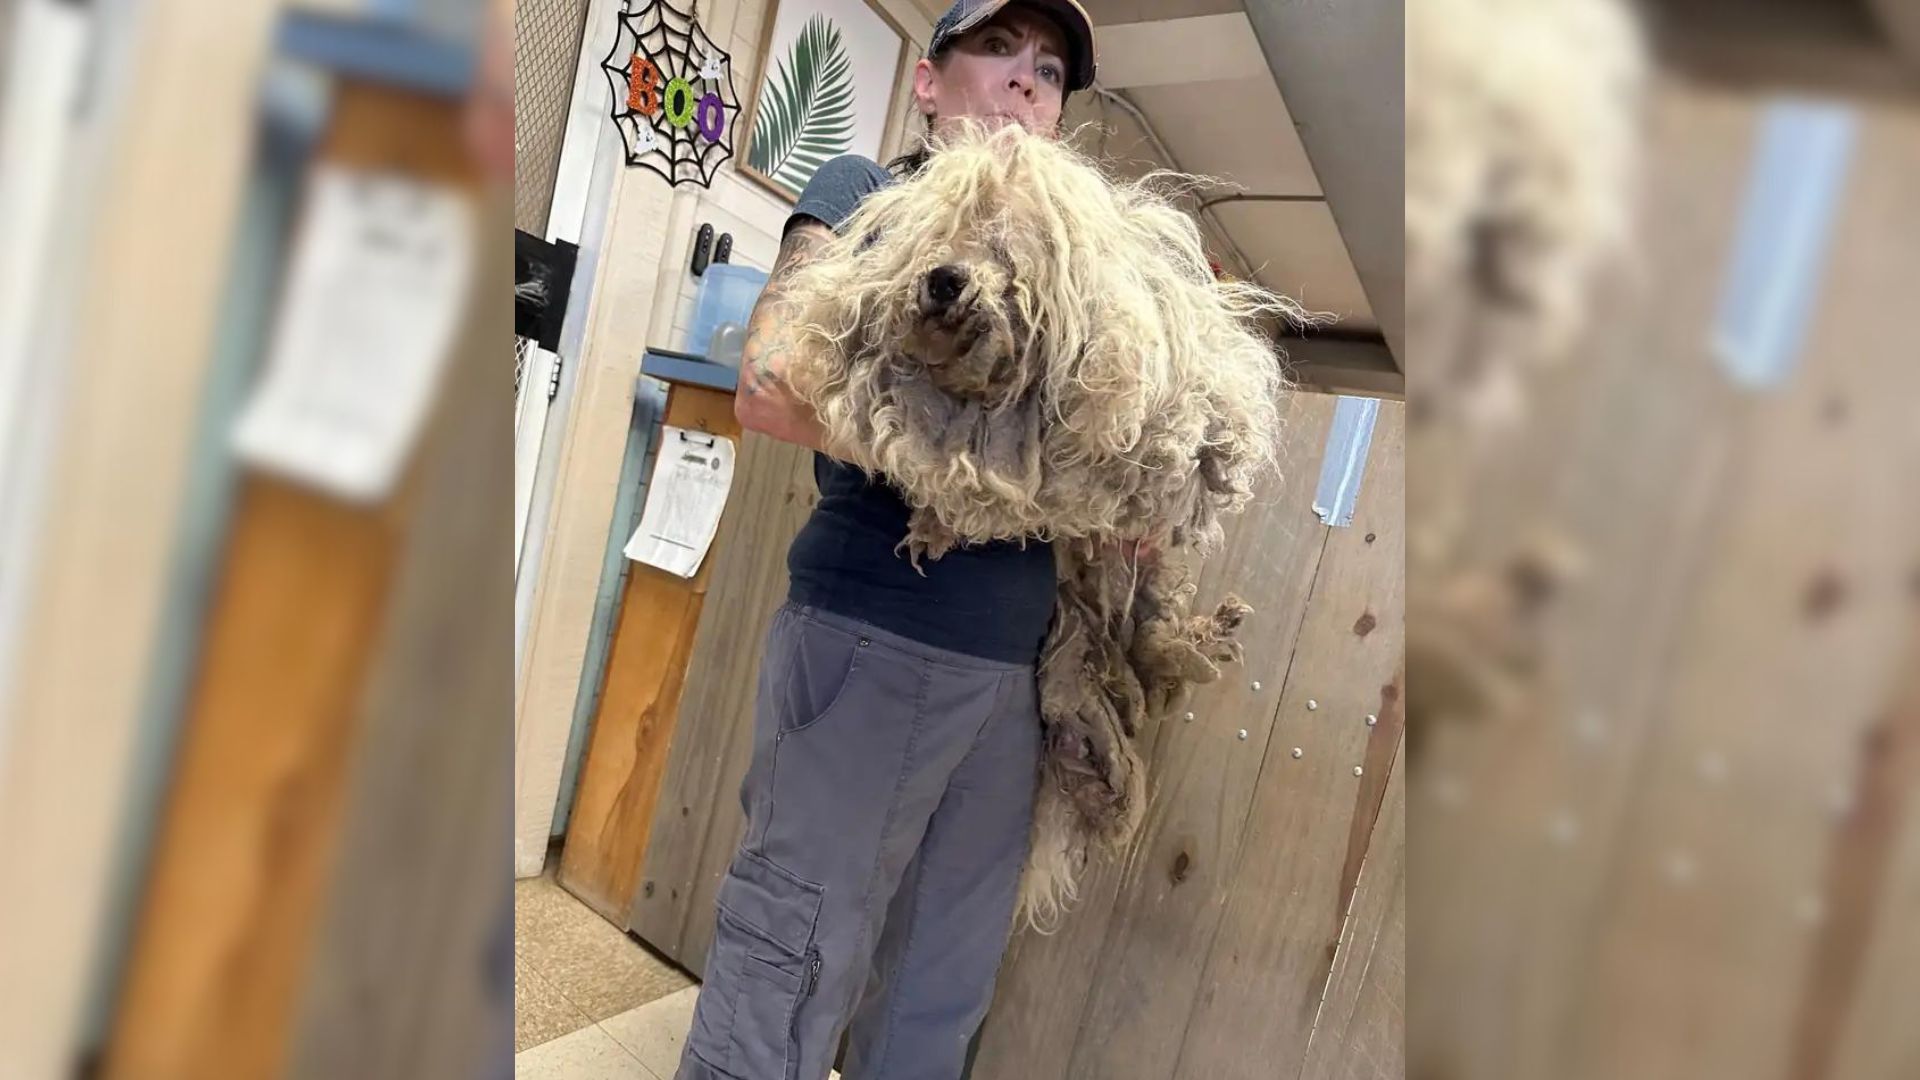 Rescuers Found A Dog Who Was Severely Matted And Helped Him Transform Completely